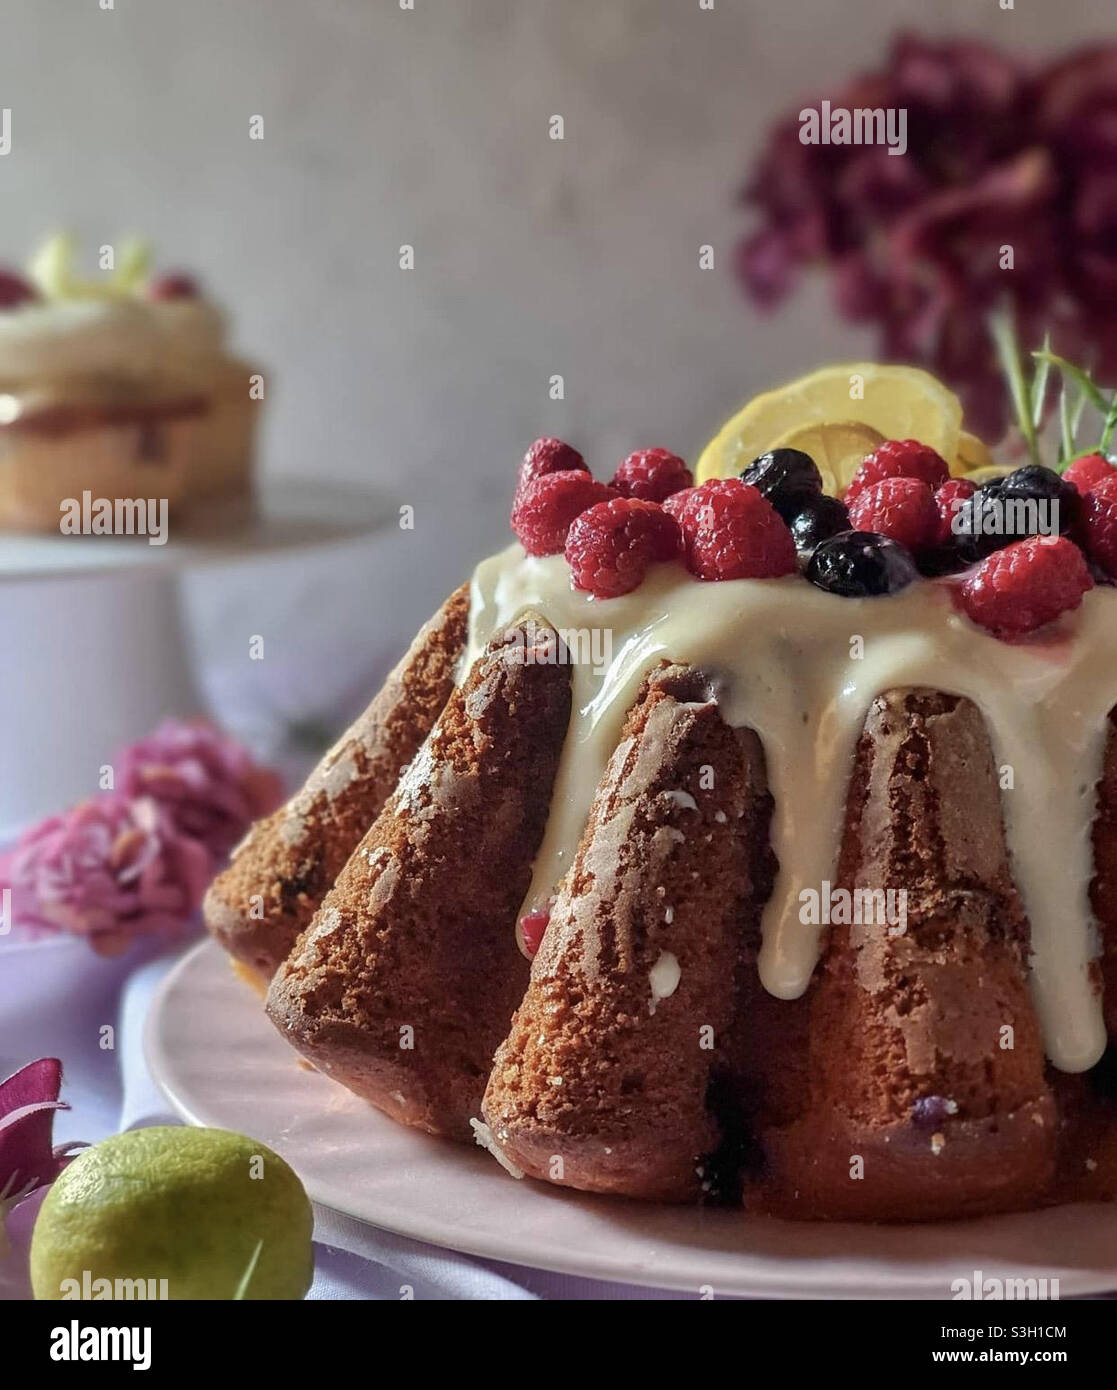 Cake gives inspiration for professionalism, beautiful and simple, I love it Stock Photo